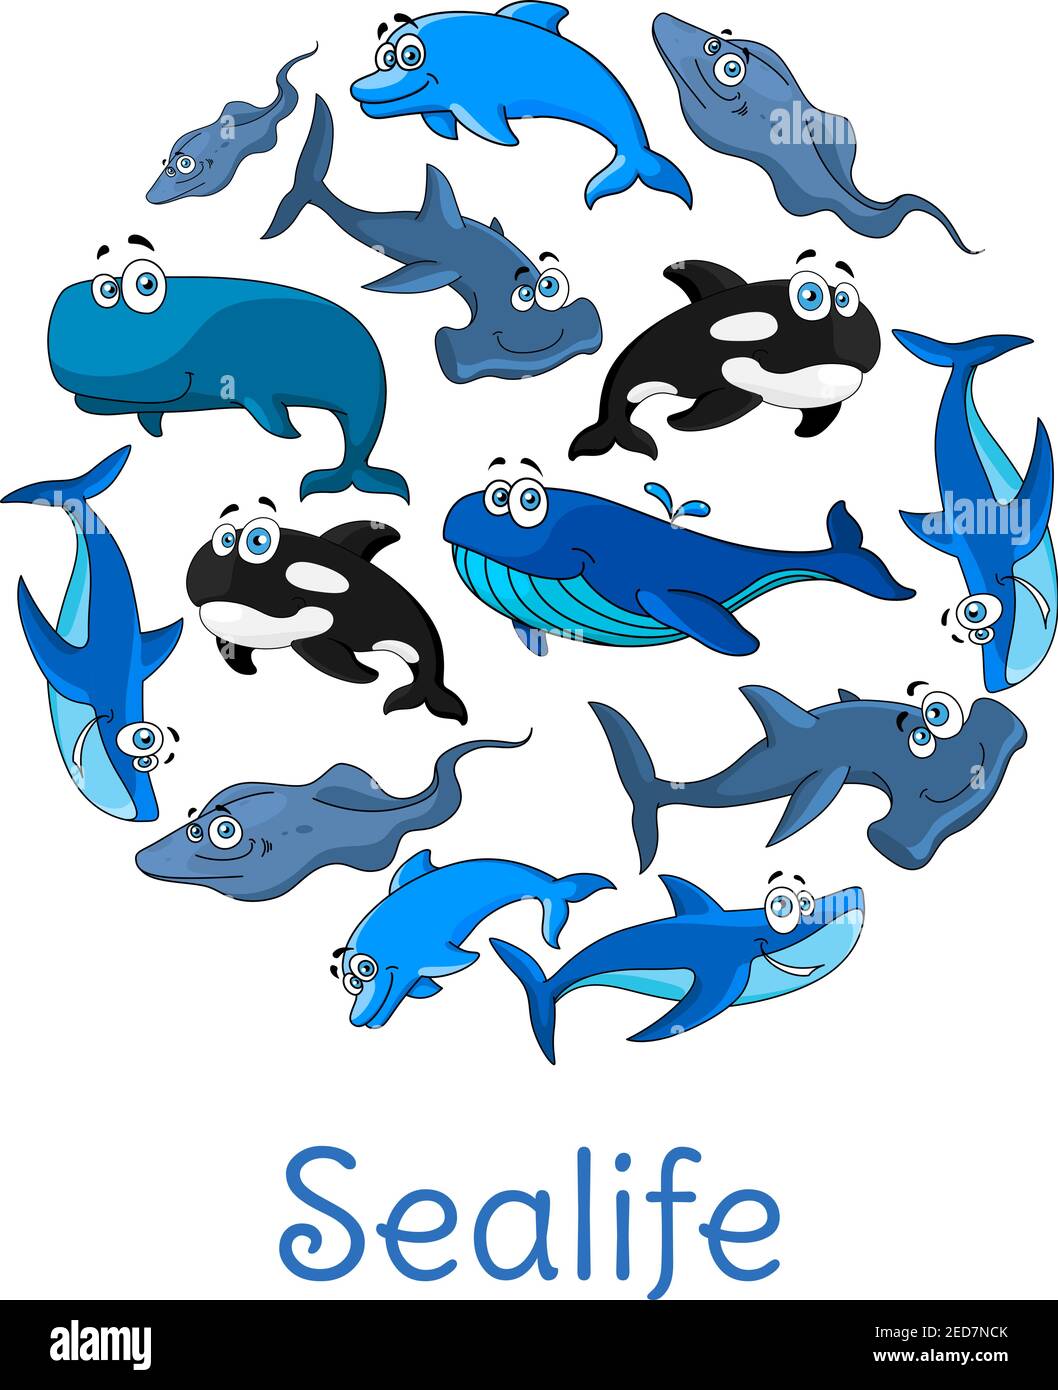 Cartoon fishes or sea animals. Ocean or sealife blue dolphin, sperm whale of cachalot, stingray and white shark, hammerhead fish, killer whale or orca Stock Vector